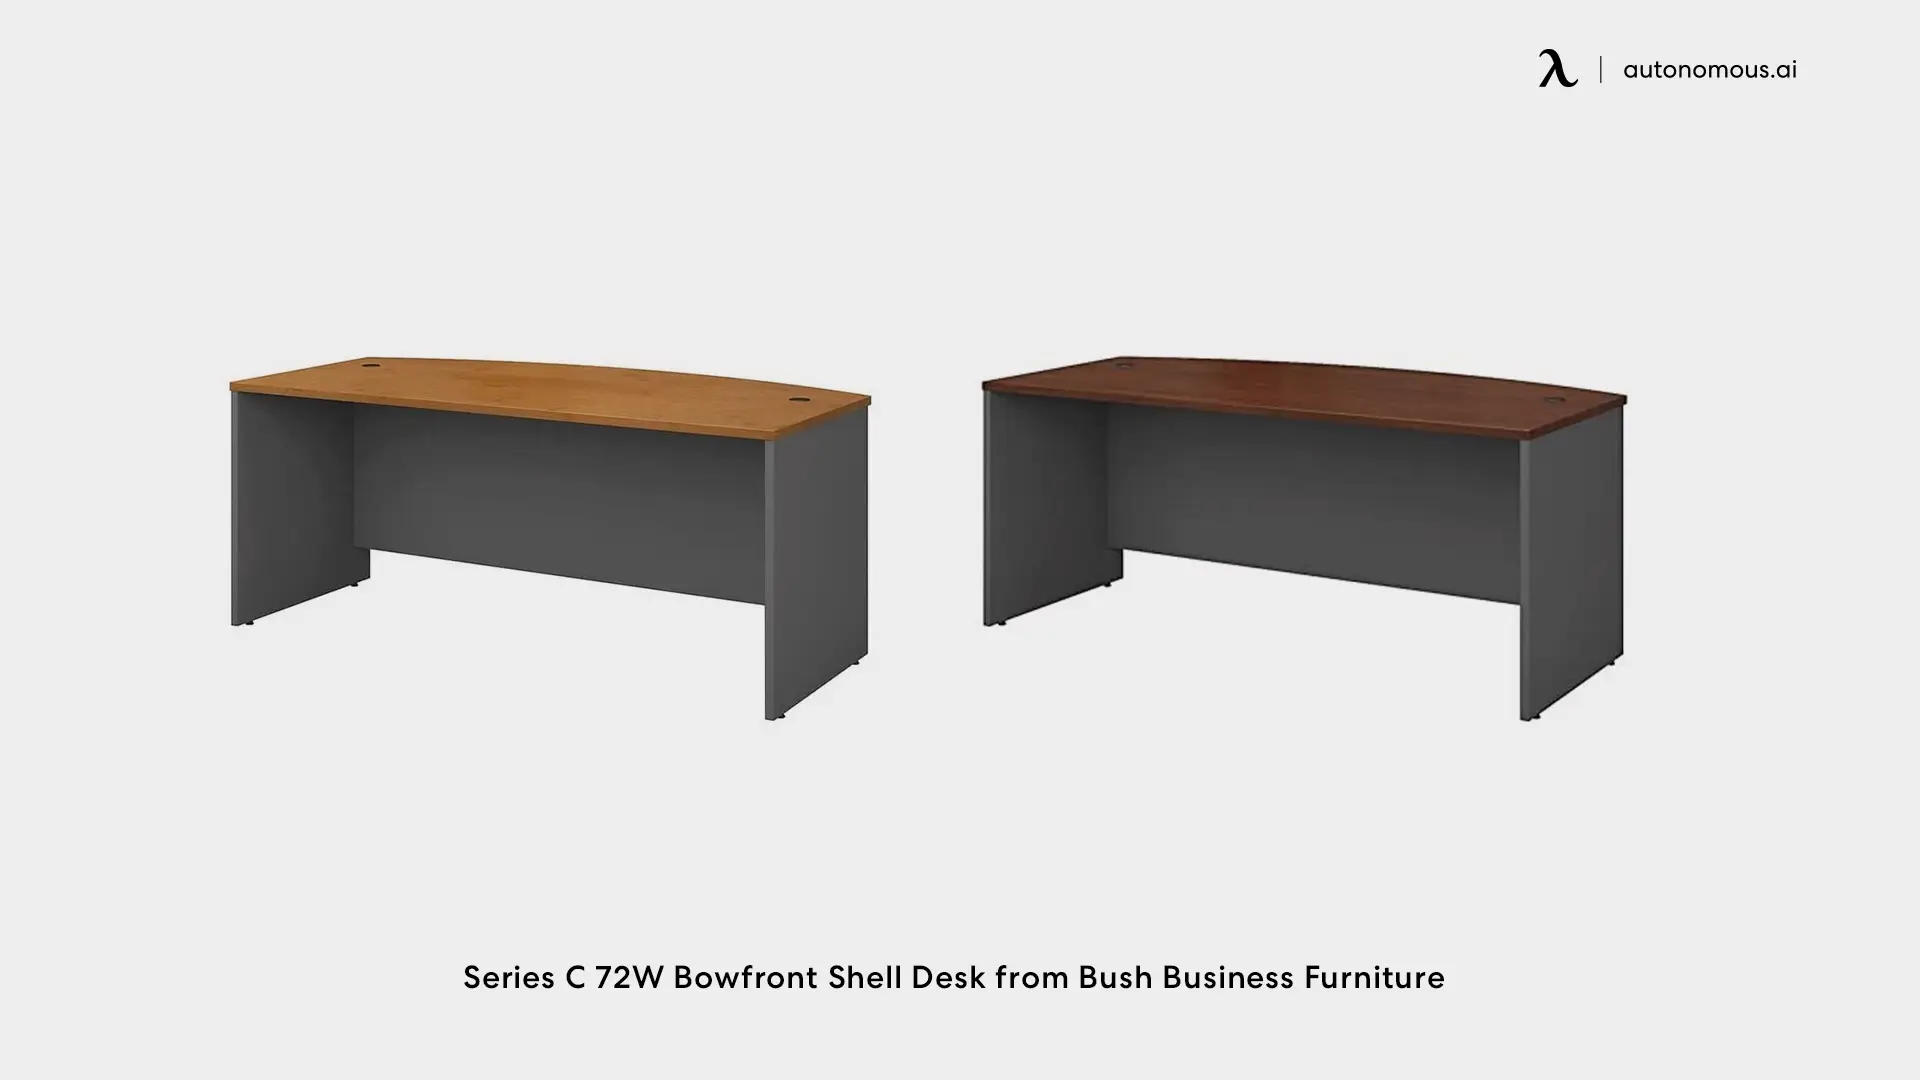 Series C 72W Bowfront Shell Desk from Bush Business Furniture